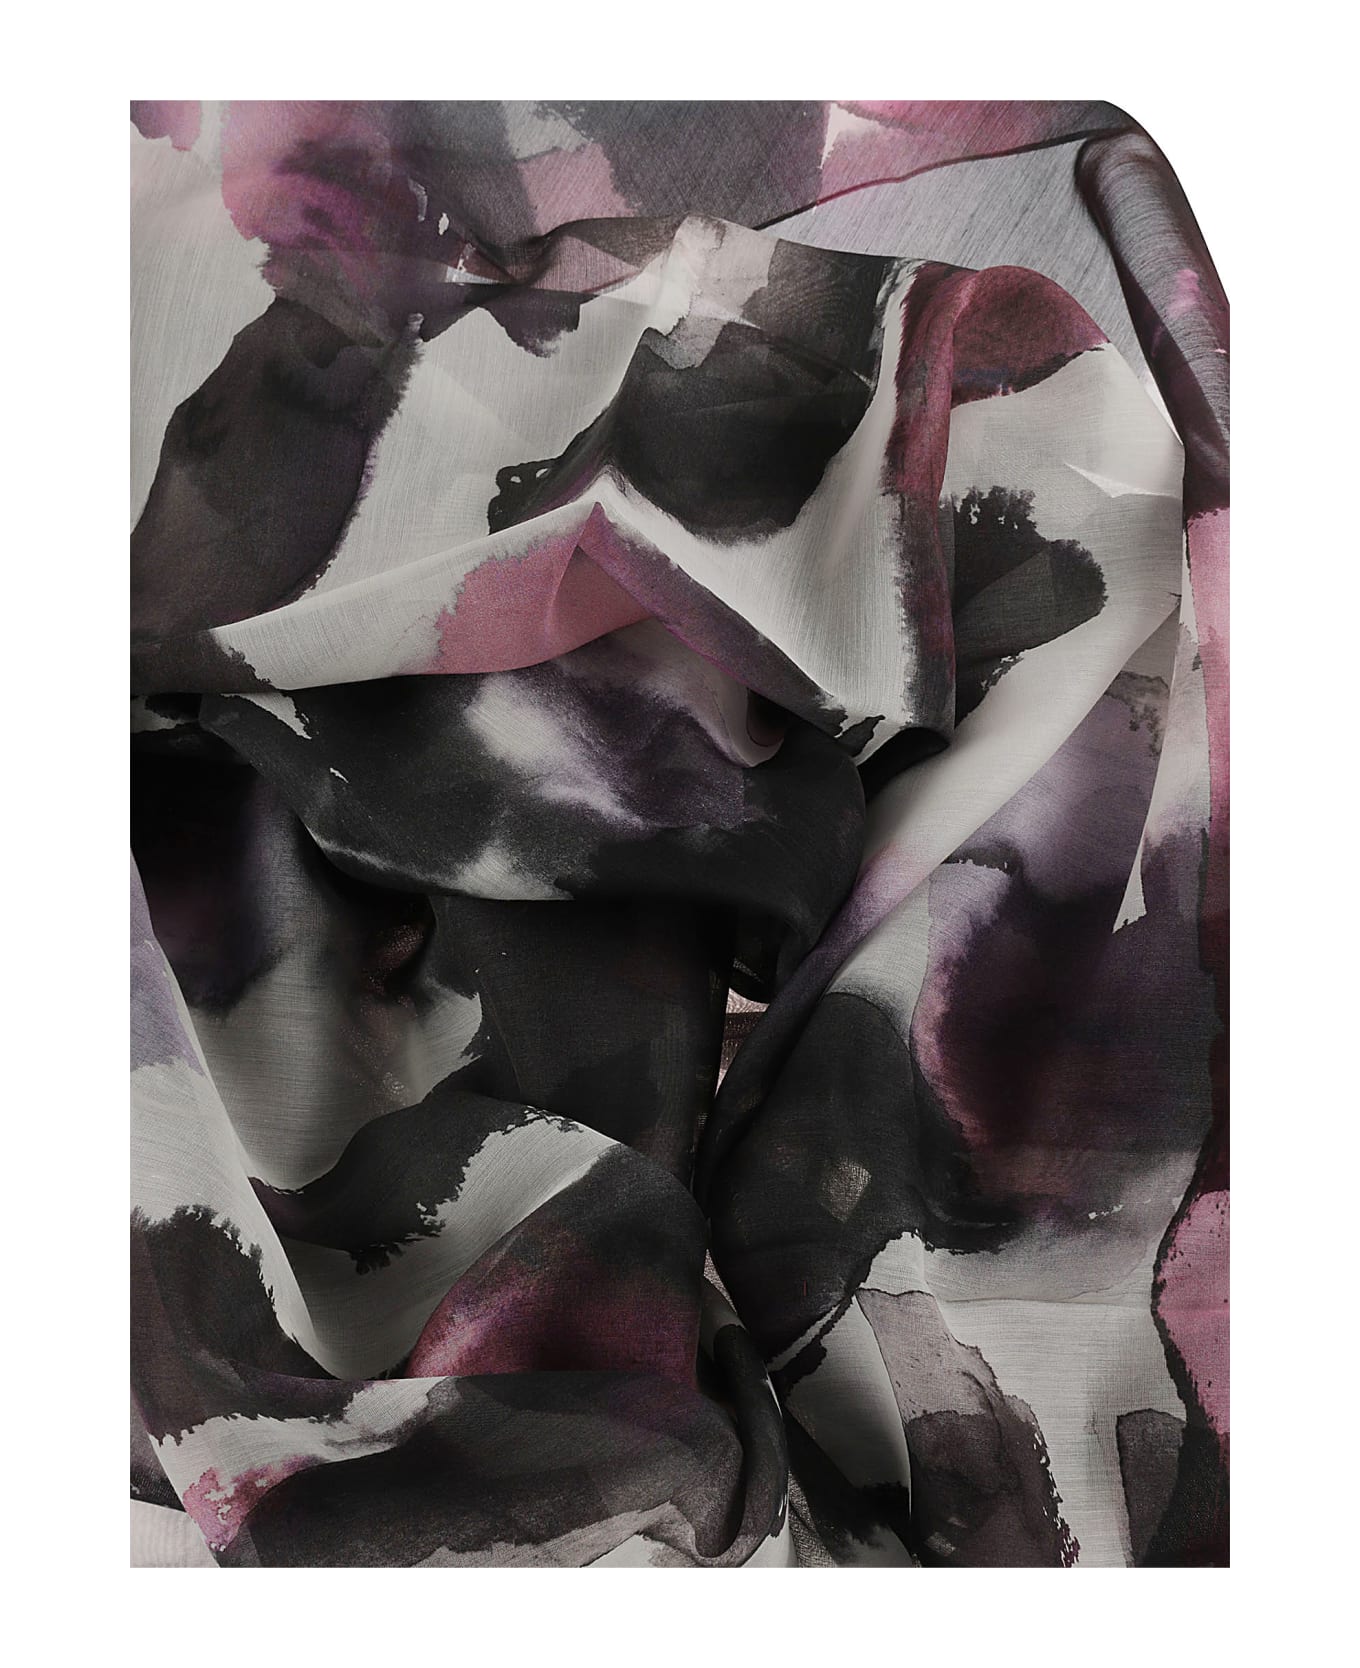 Alexander McQueen Printed All-over Scarf - Pink/Black